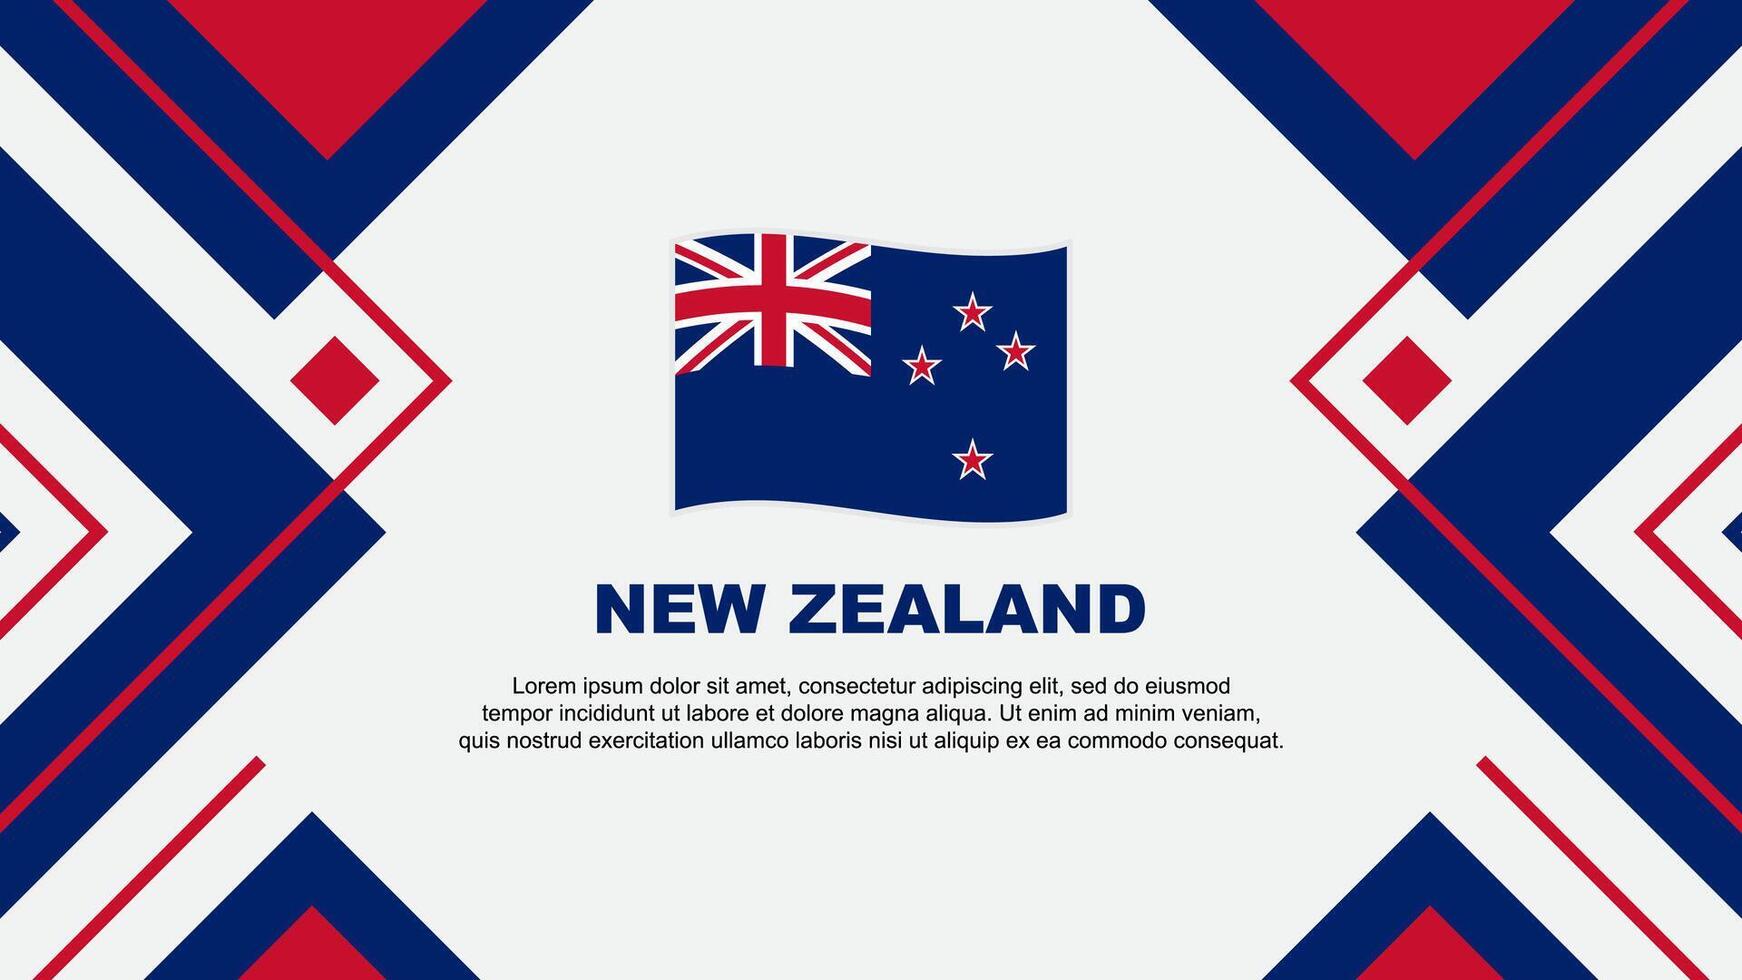 New Zealand Flag Abstract Background Design Template. New Zealand Independence Day Banner Wallpaper Vector Illustration. New Zealand Illustration